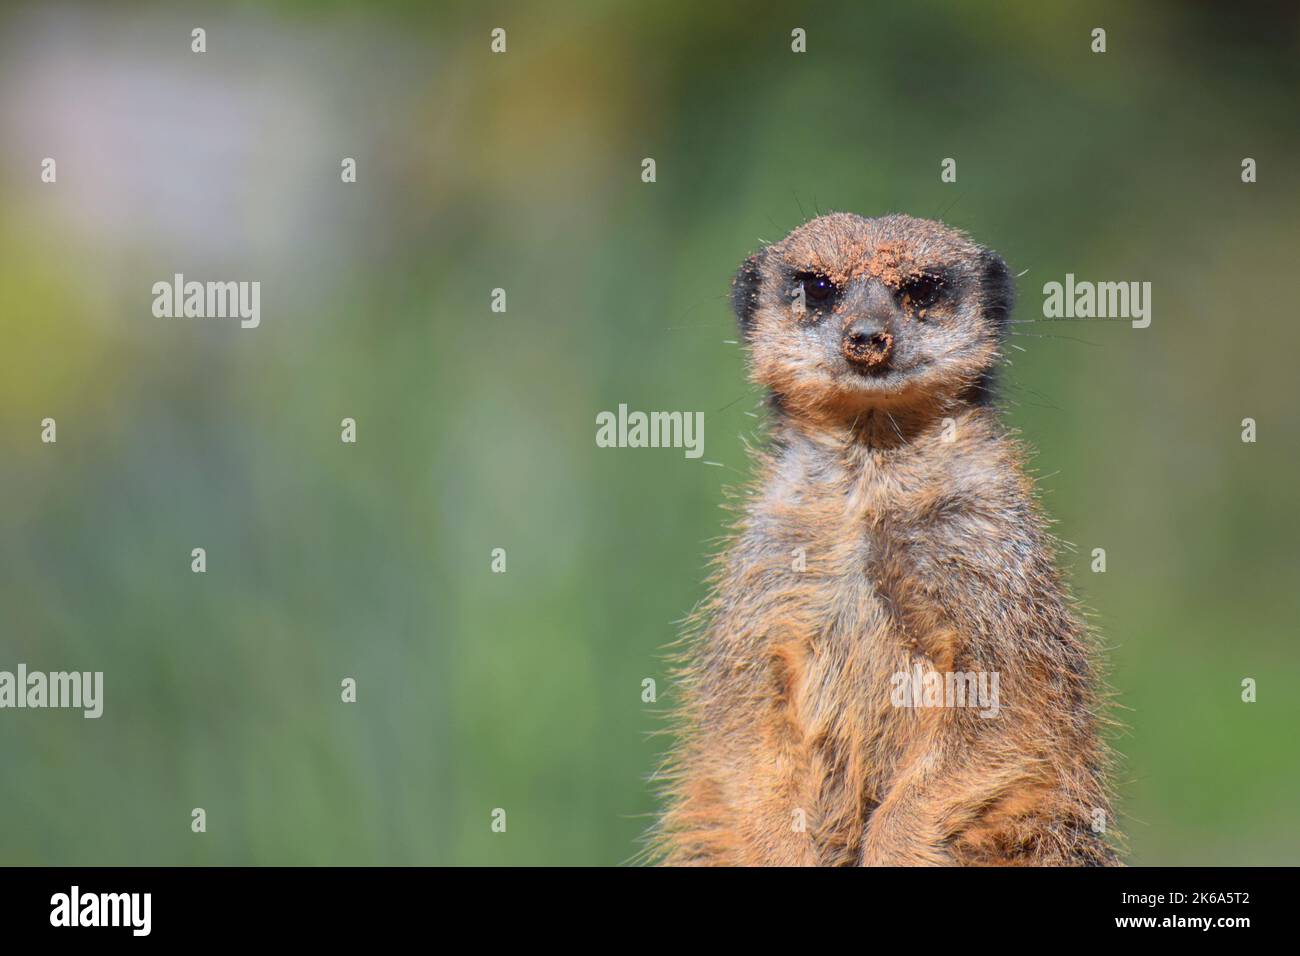 A meerkat takes a pause from foraging to survey it's surroundings at a wildlife park in Yorkshire, England. Stock Photo